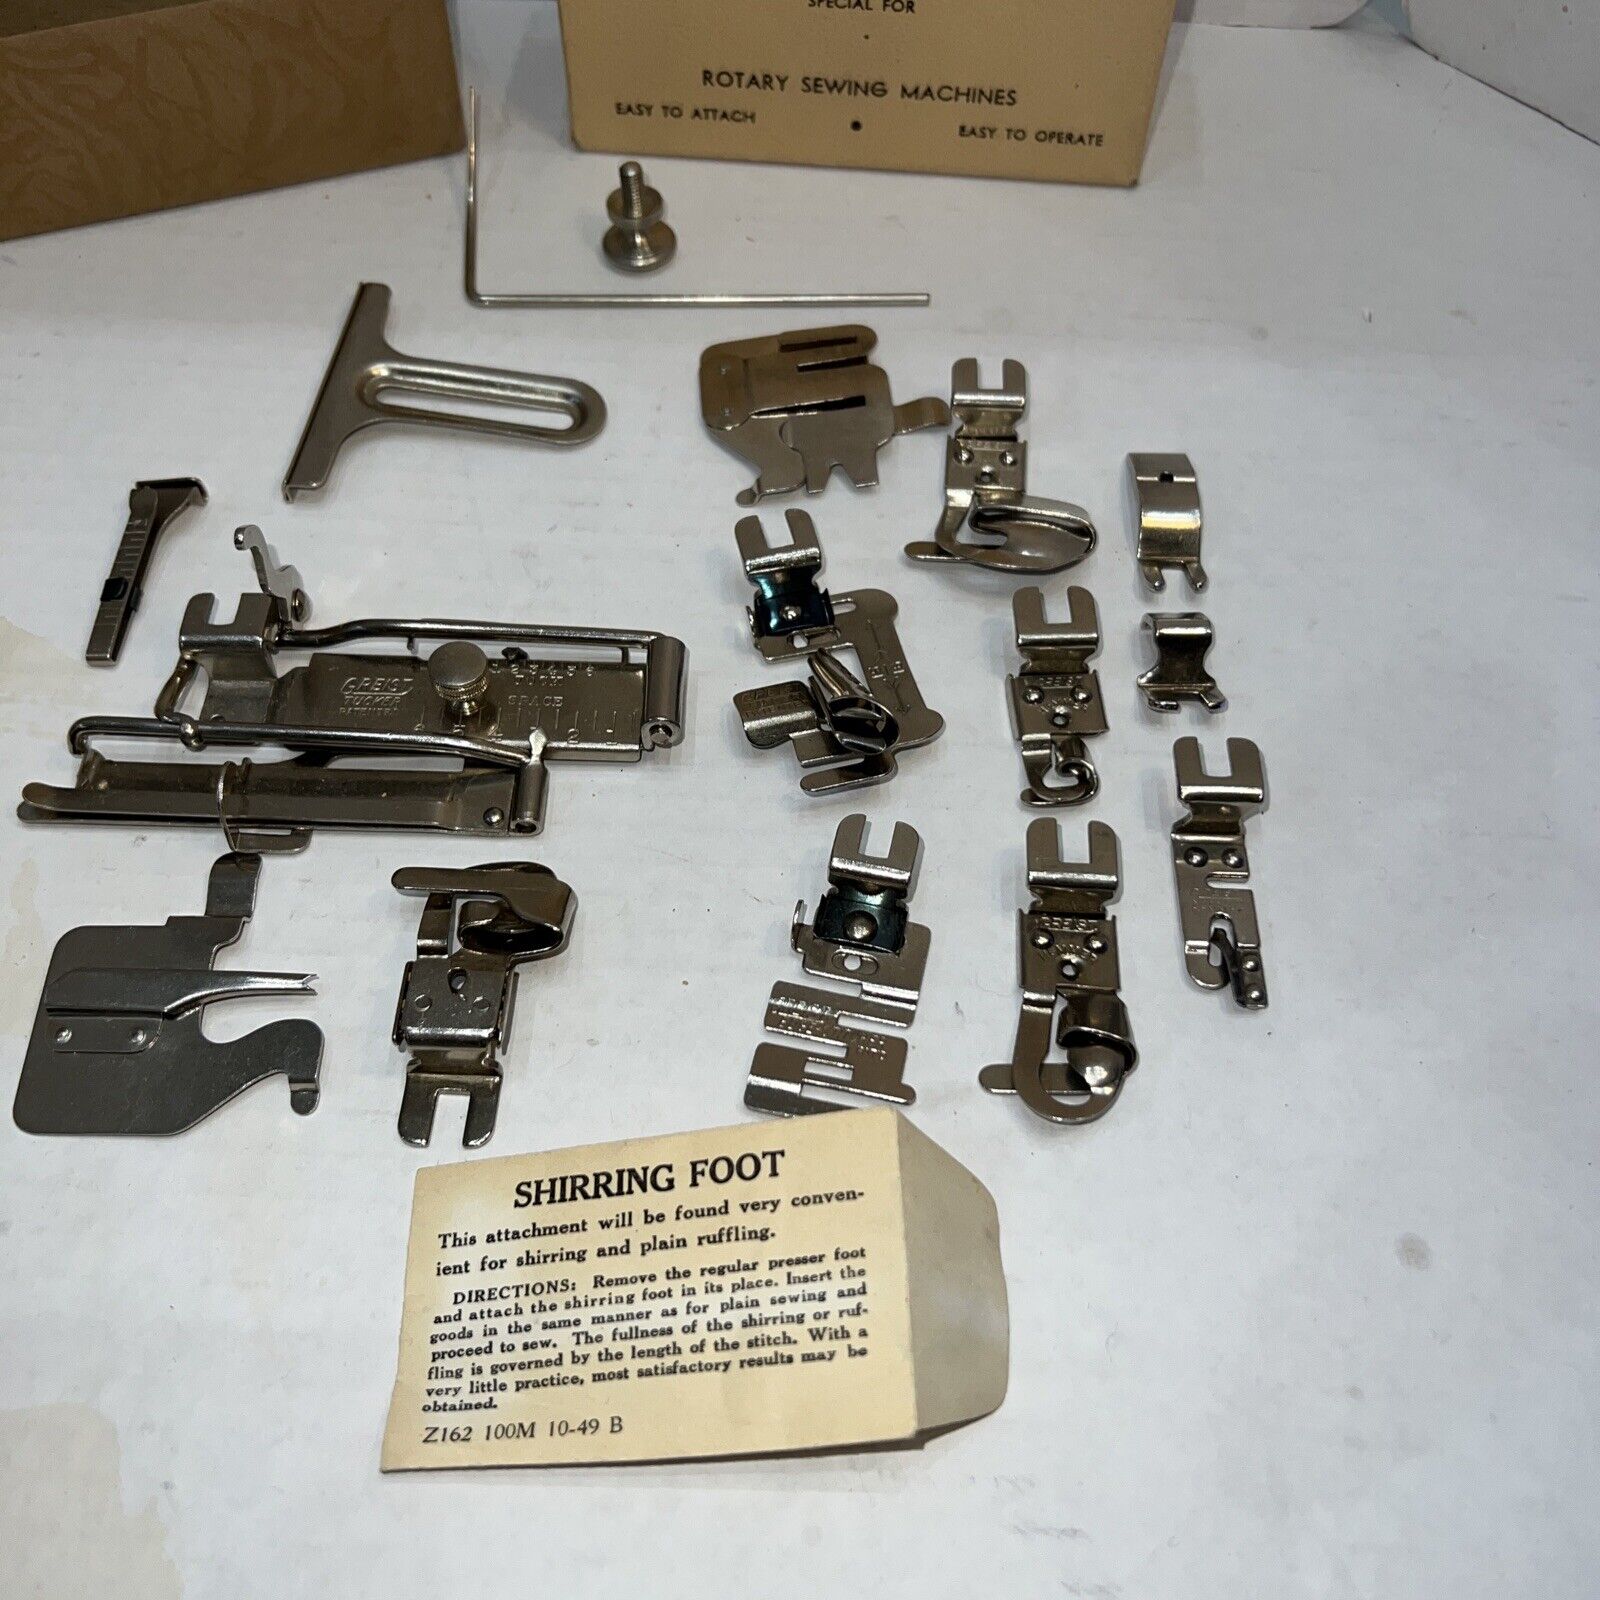 Vintage Greist Mfg Co Sewing Attachments For Rotary Sewing Machines 16 Pieces